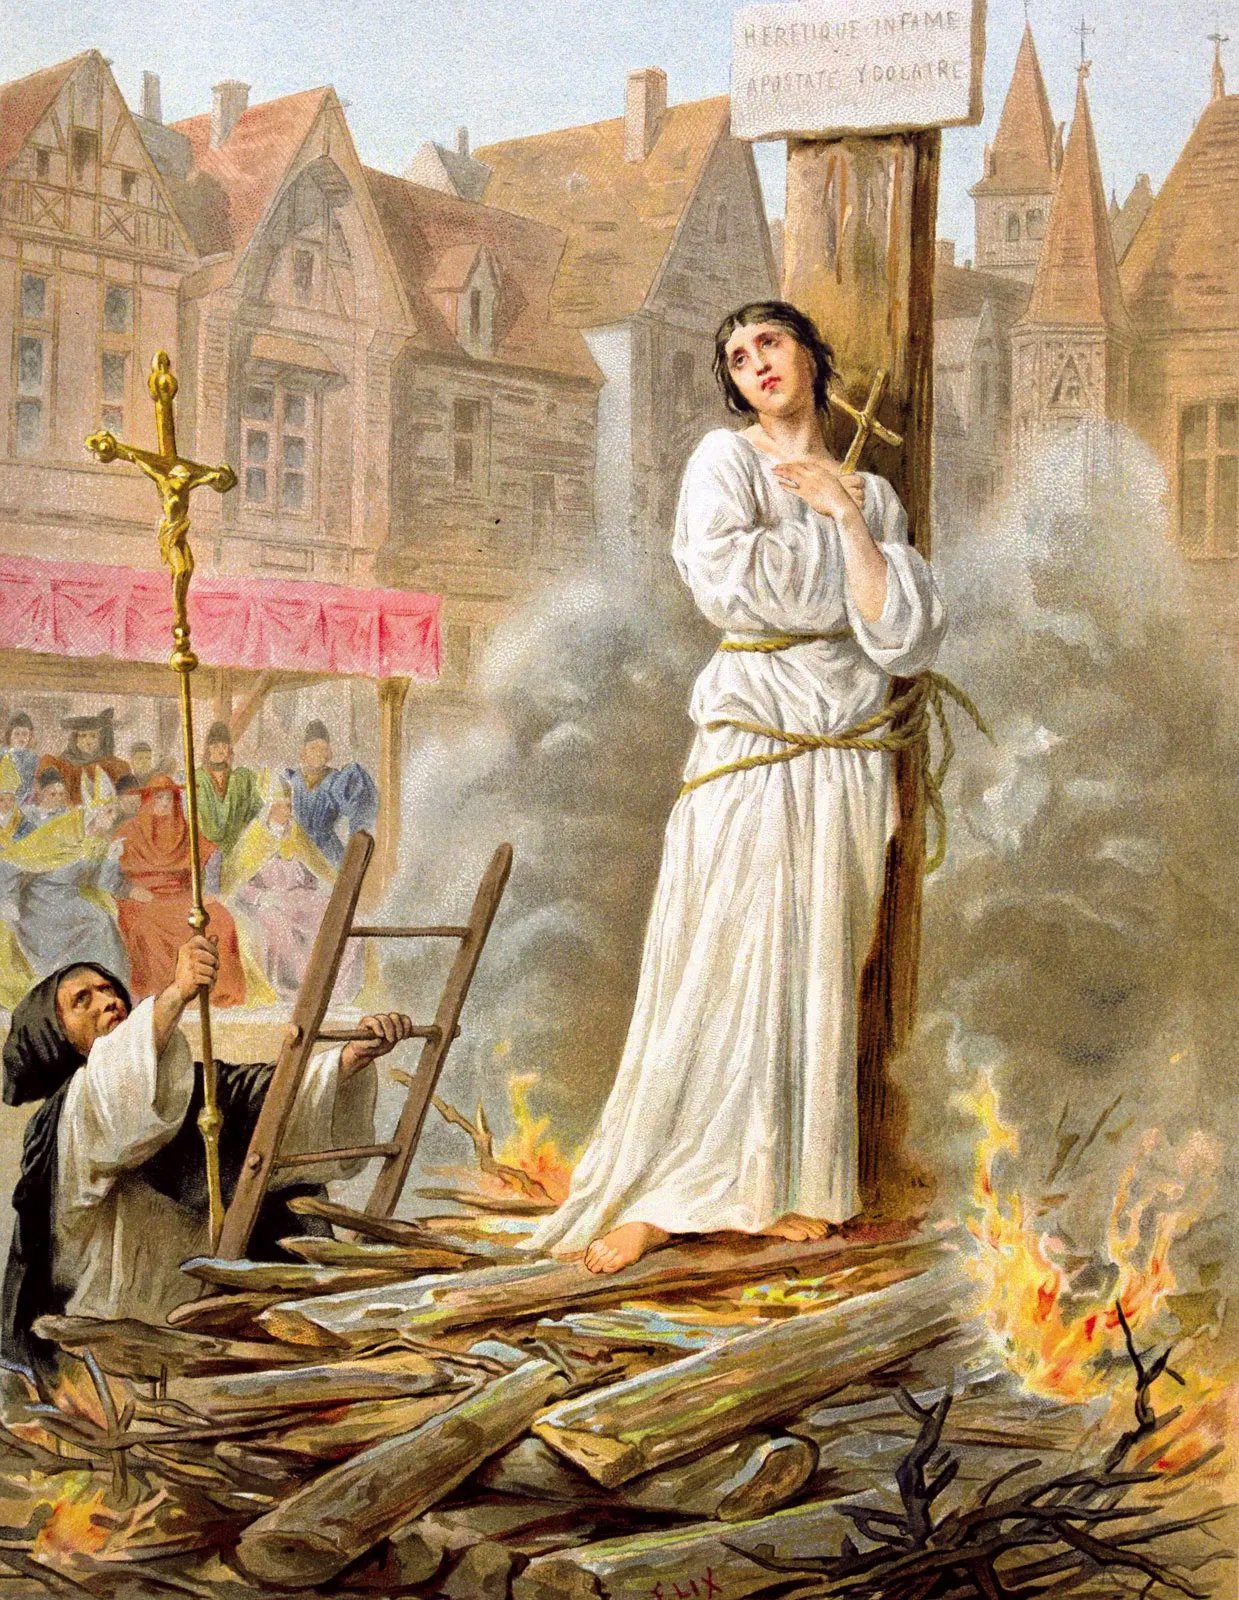 A medieval painting of Joan of Arc tied to a stake with a fire burning below her. She is wearing a white robe and is tied to the stake with rope. The background is a medieval town with buildings and people watching the scene. The text on the top right corner of the image reads “Heretique enflamme” (Heretic on fire).